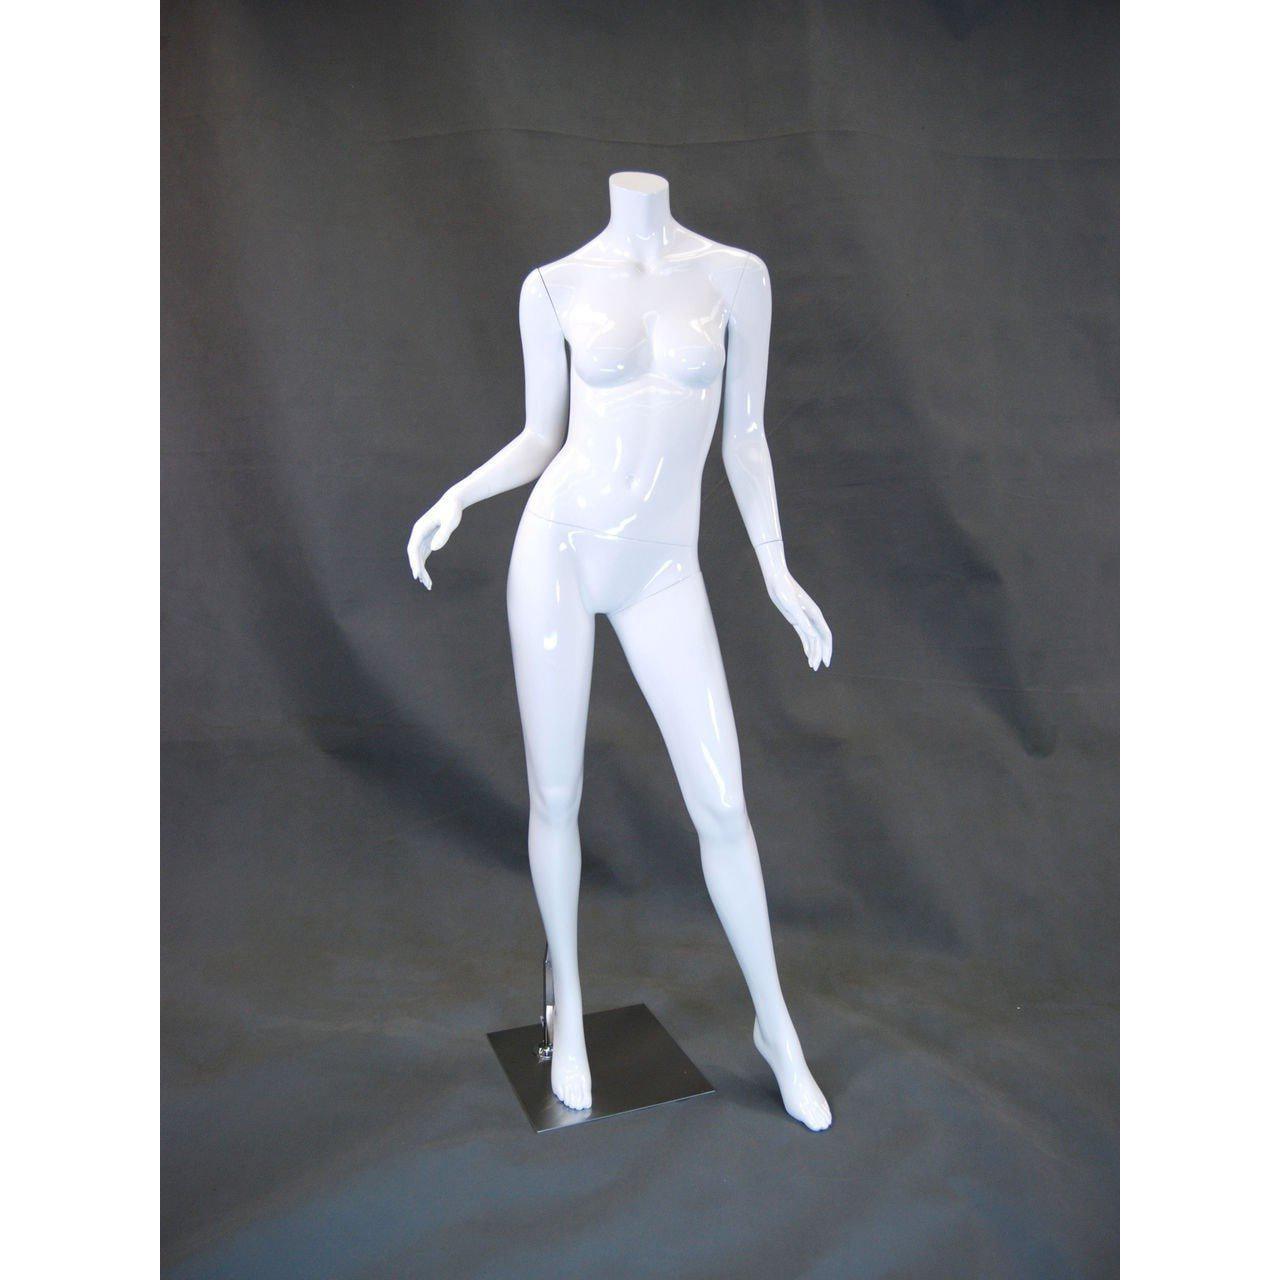 Full Body Glossy Female Mannequin Pose 3, Display Warehouse